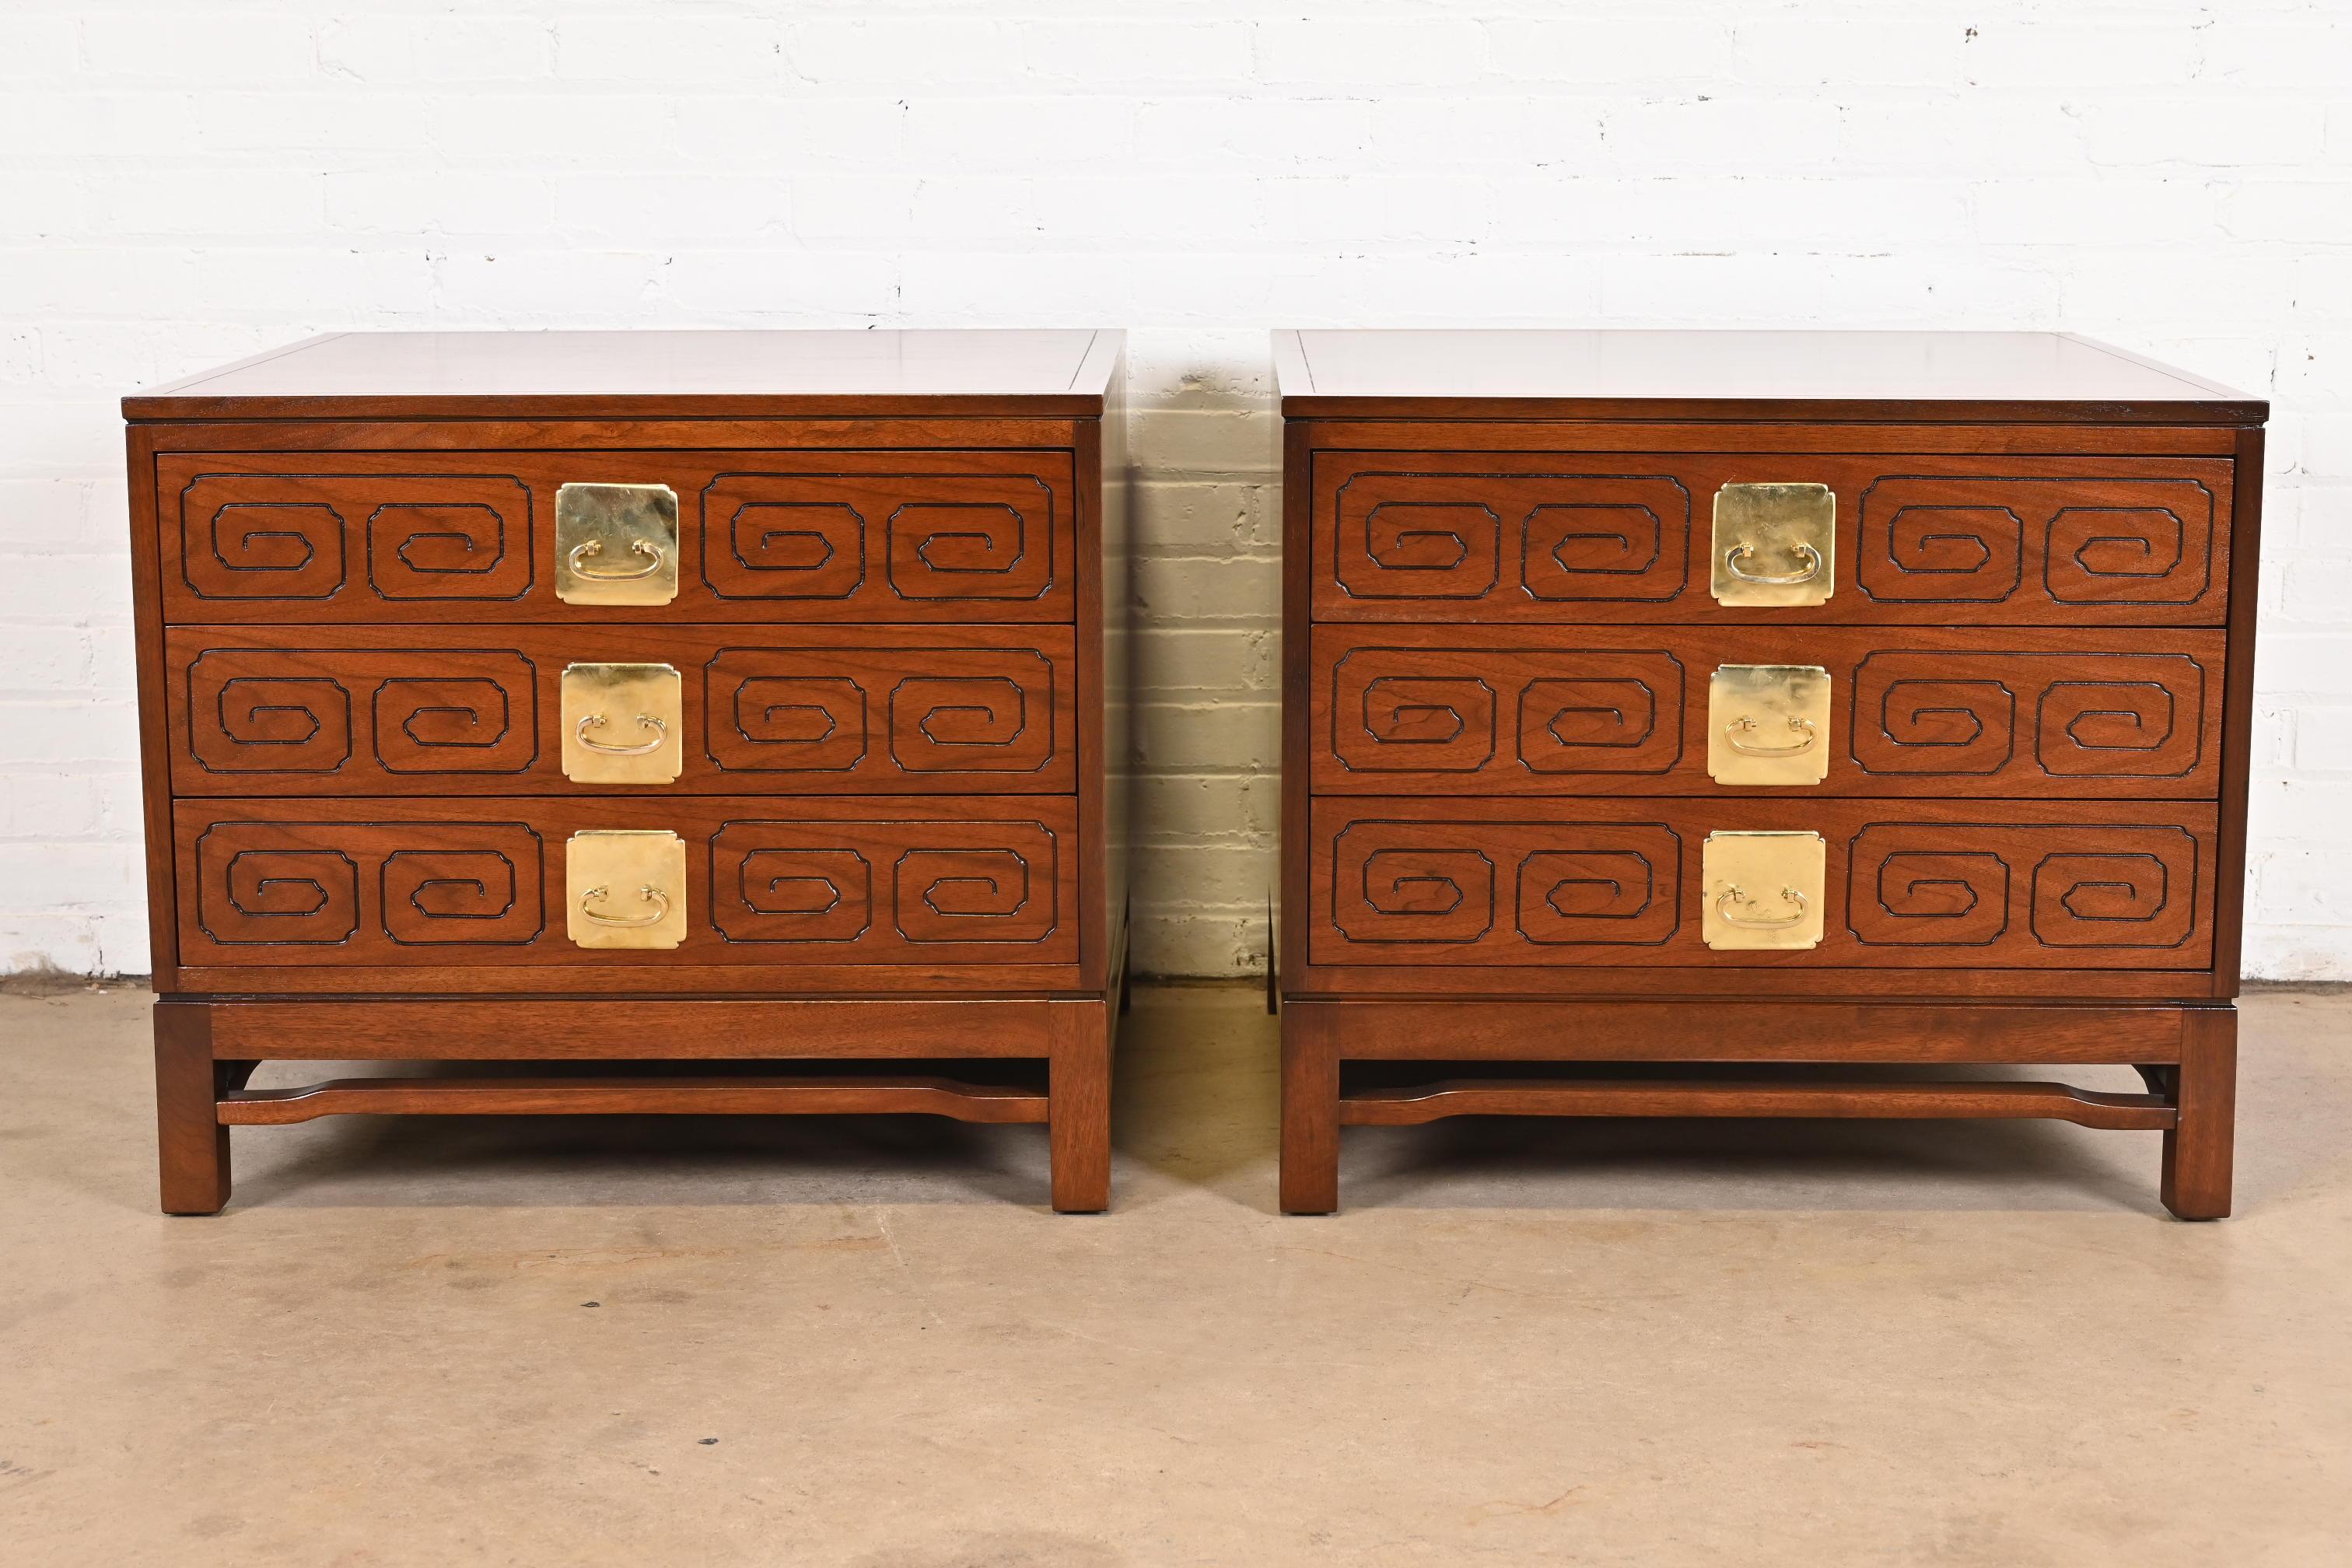 An exceptional pair of mid-century modern Hollywood Regency Chinoiserie nightstands or chests of drawers

Attributed to T.H. Robsjohn-Gibbings

By Widdicomb

USA, 1950s

Sculpted walnut, with unique etched drawer fronts and Asian-inspired